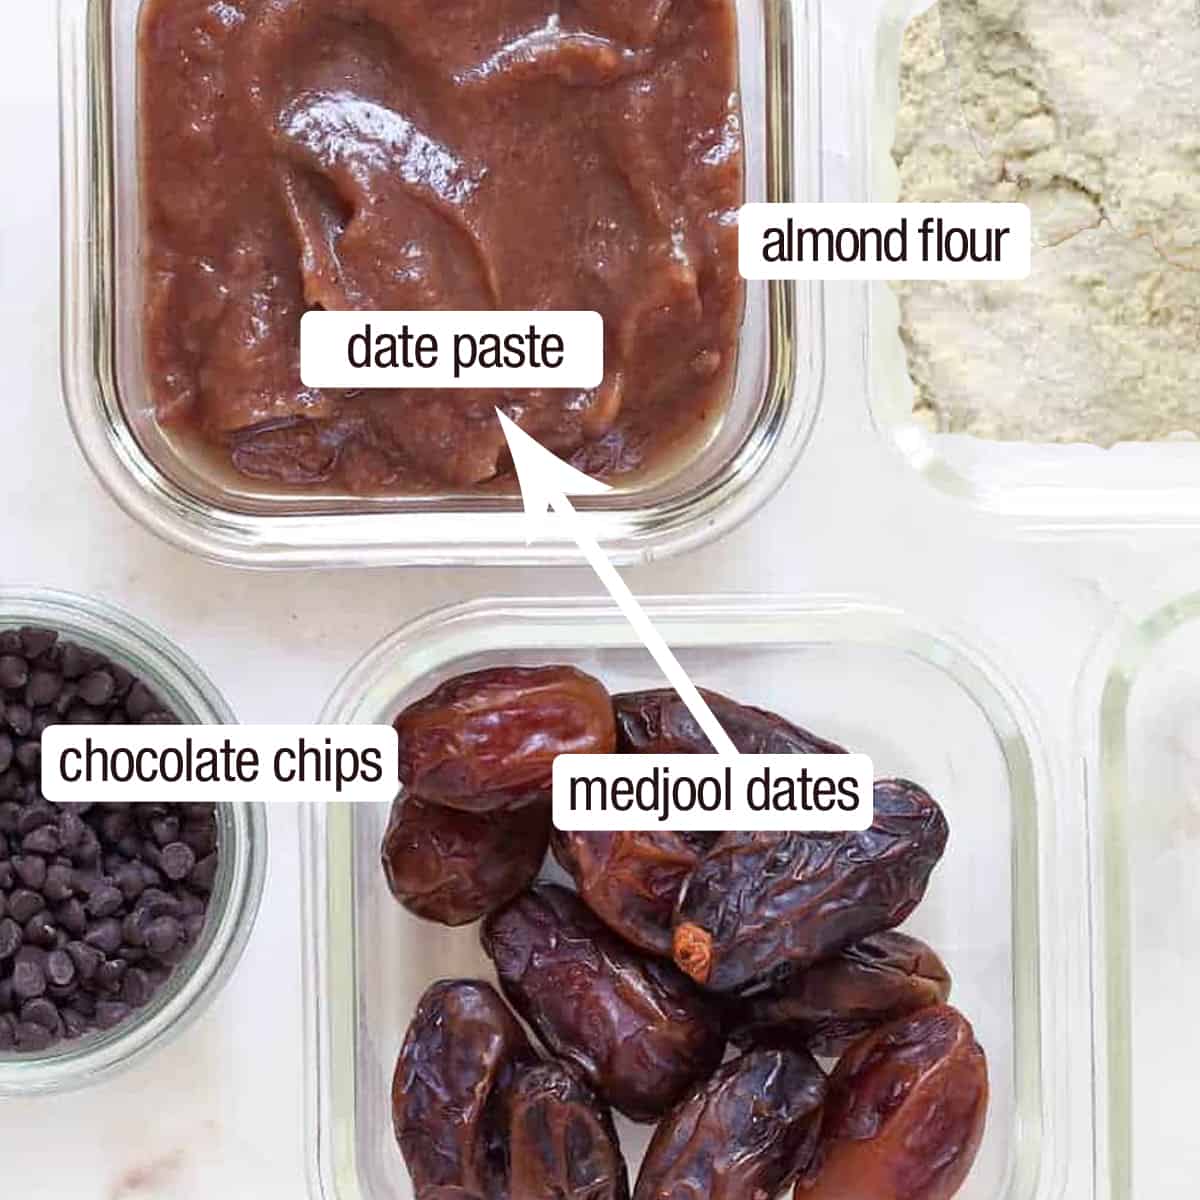 ingredients for mars bars, open bowl of dates and almond flour